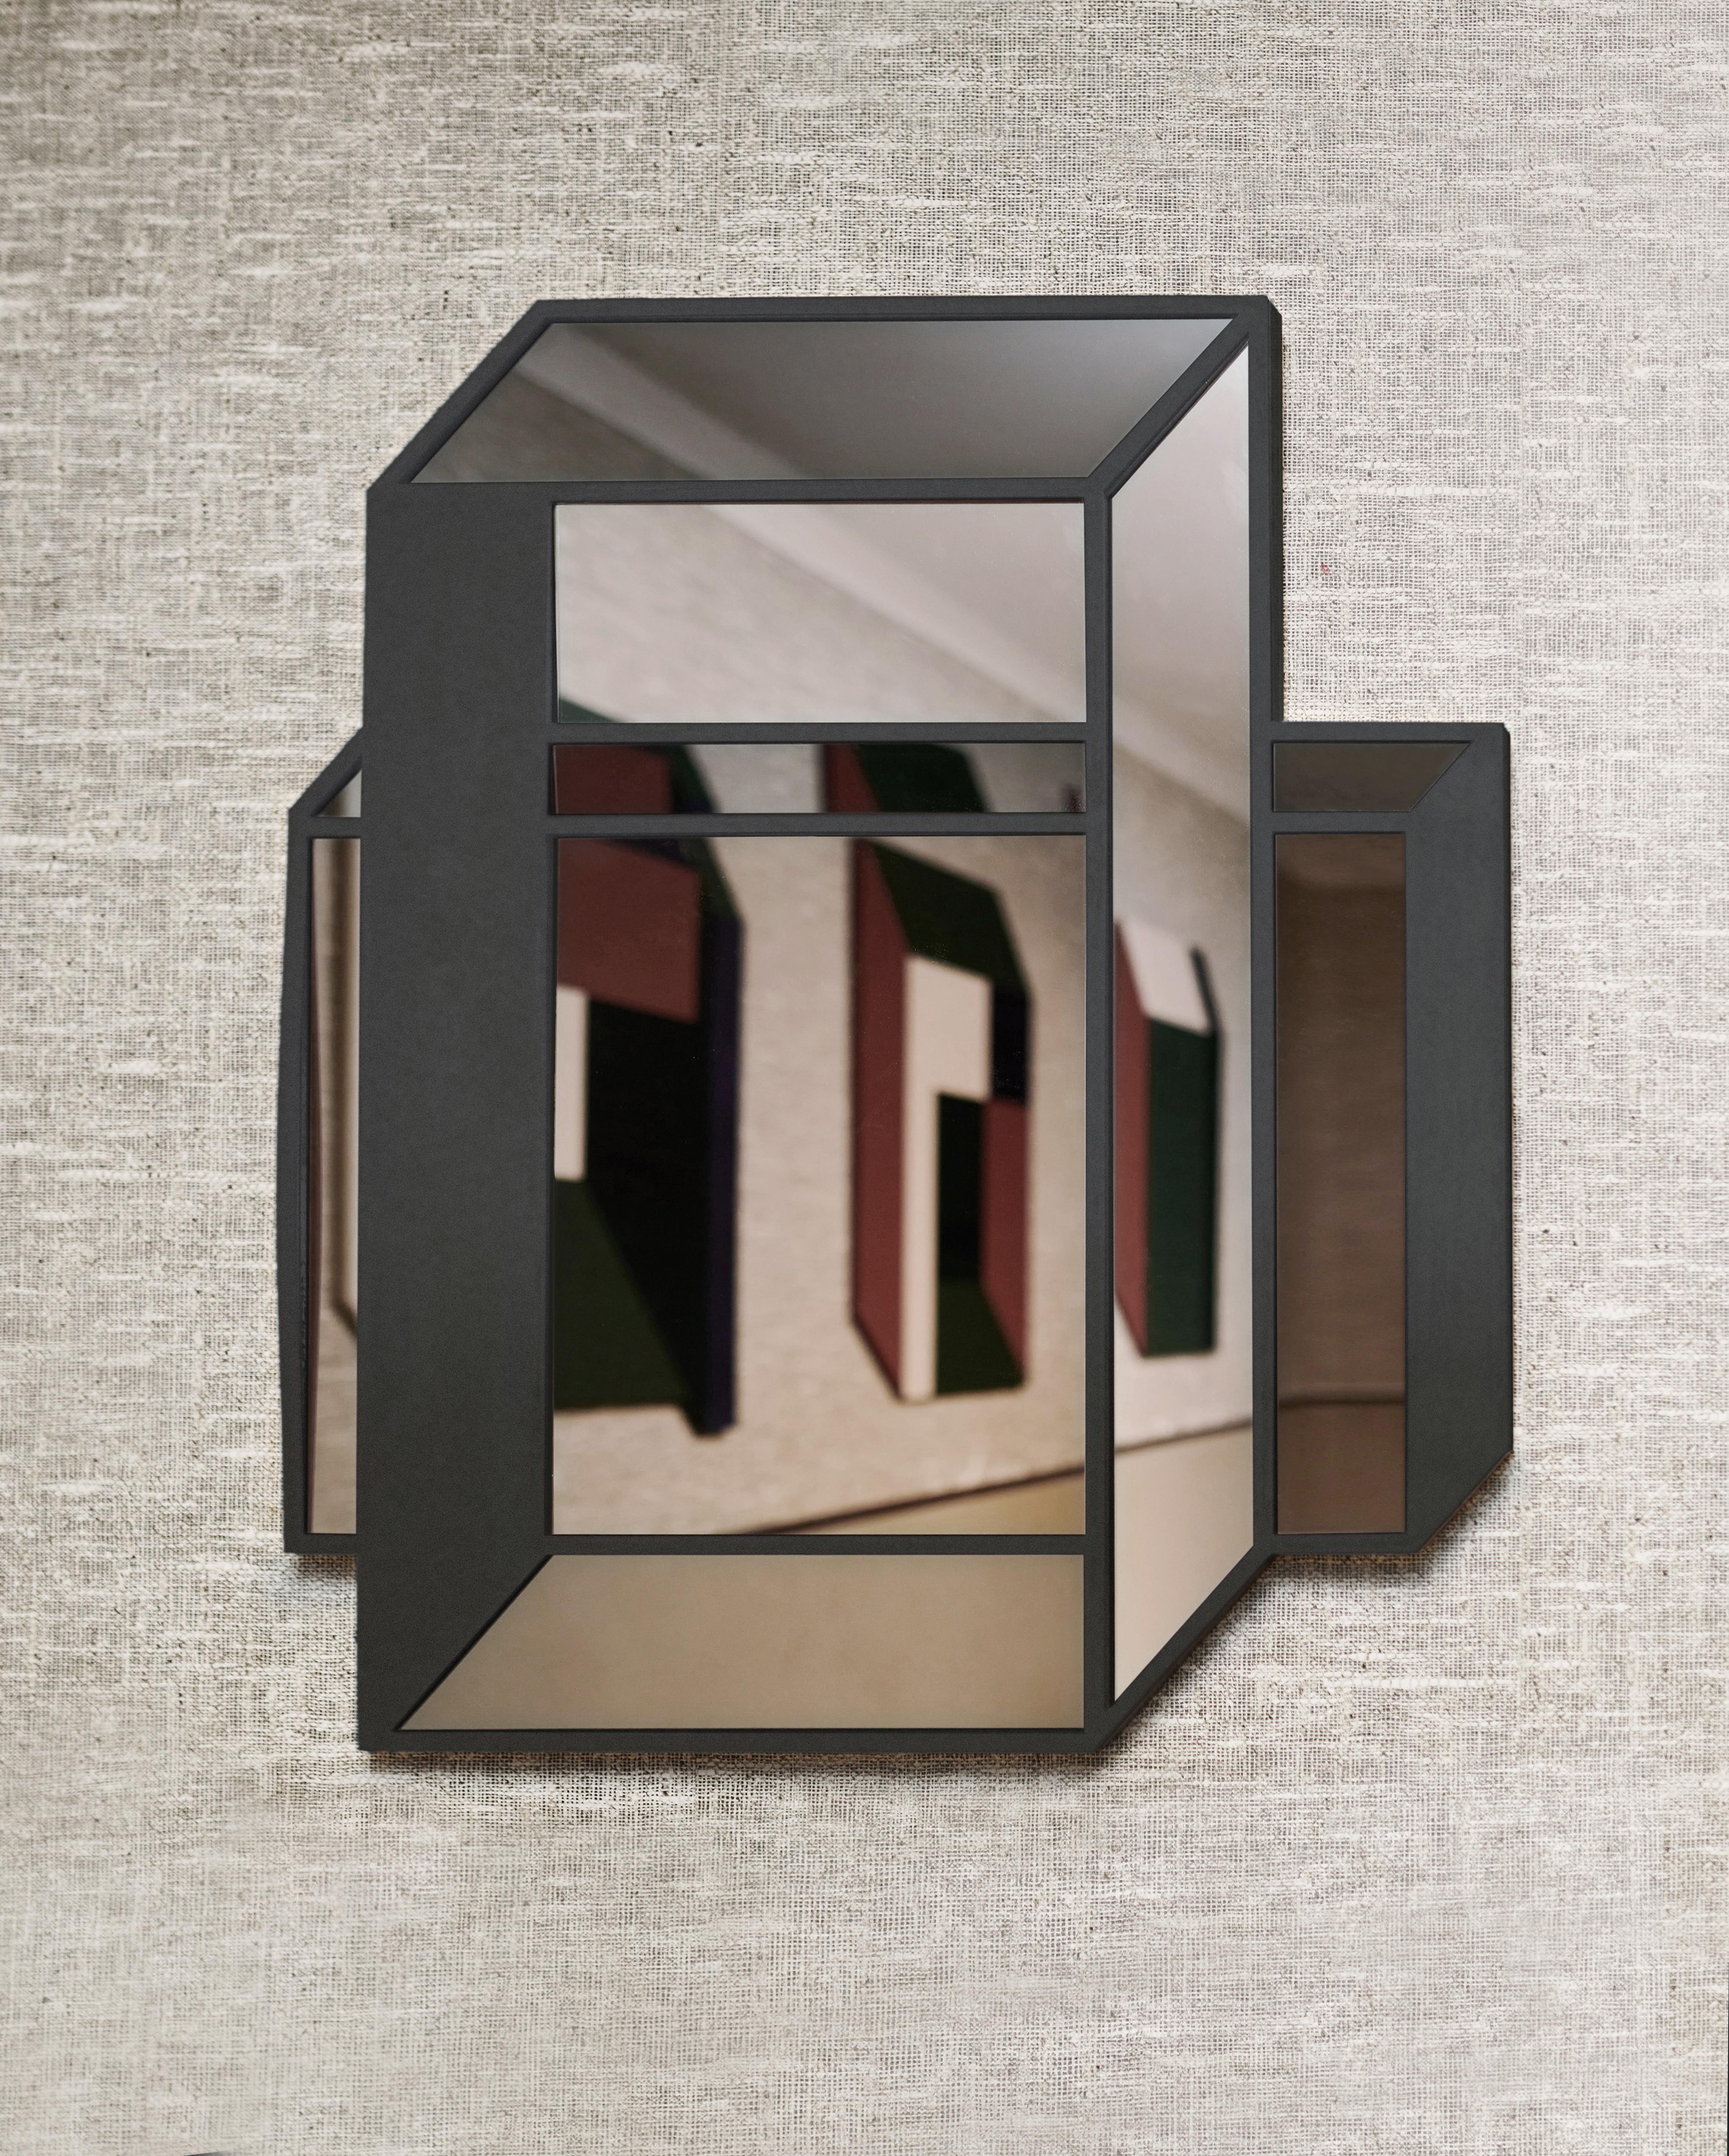 Mirror object No.1 by Dechem Studio.
Dimensions: D 80 x H 95 cm.
Materials: glass, metal.

Axonometric wall mounted mirrors as a symbol of transience and ephemerality translates the three-dimensional relations into a flat surface. Through the